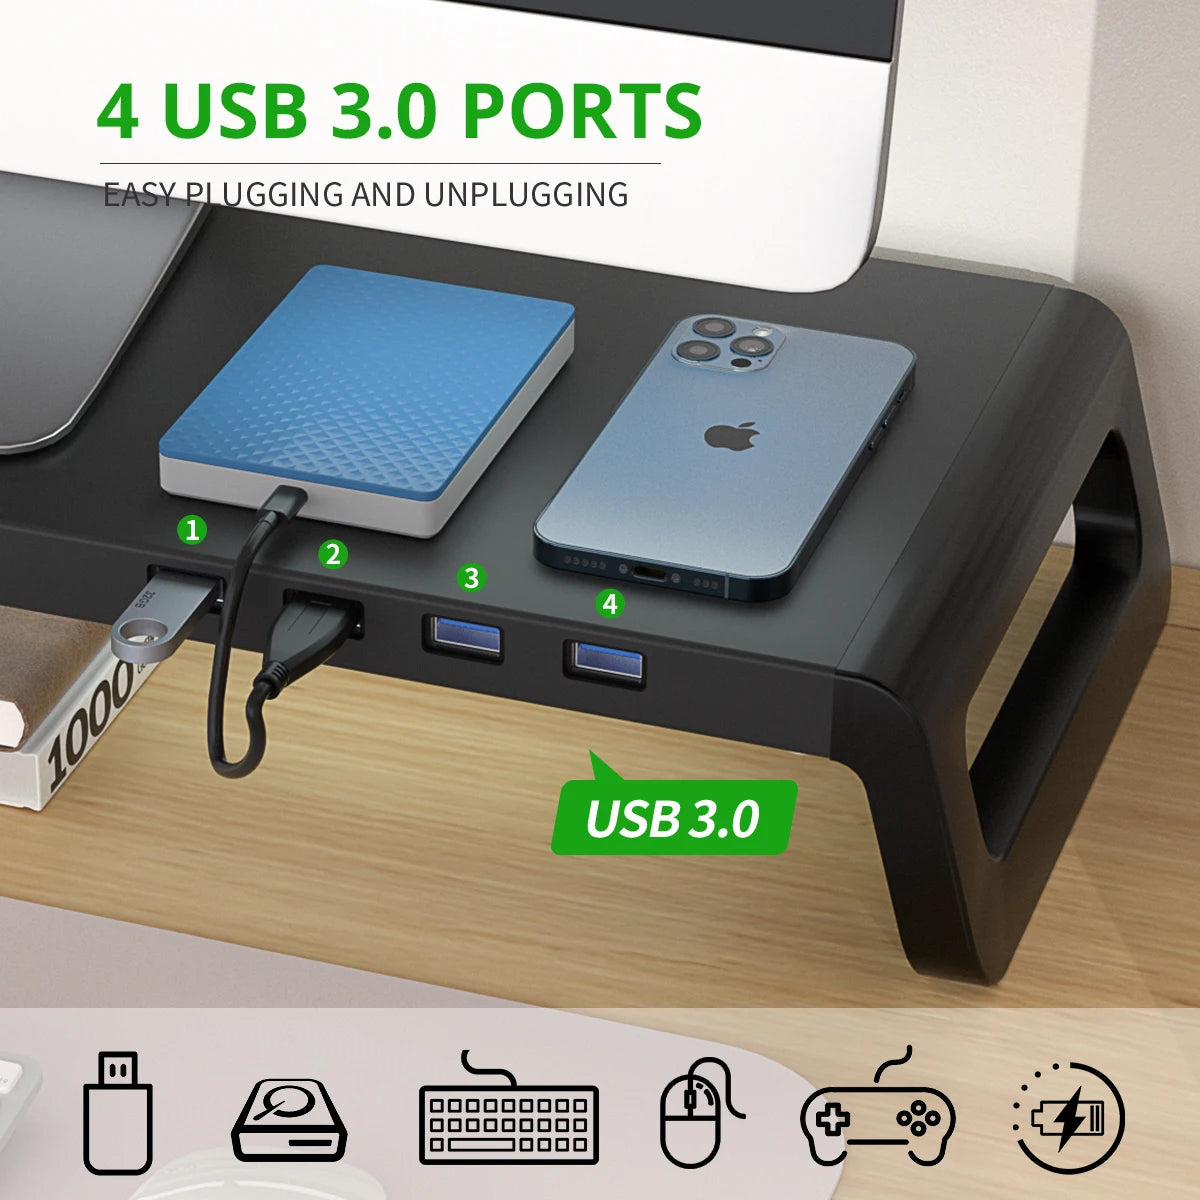 Monitor Desk Stand with USB 3.0 Hub